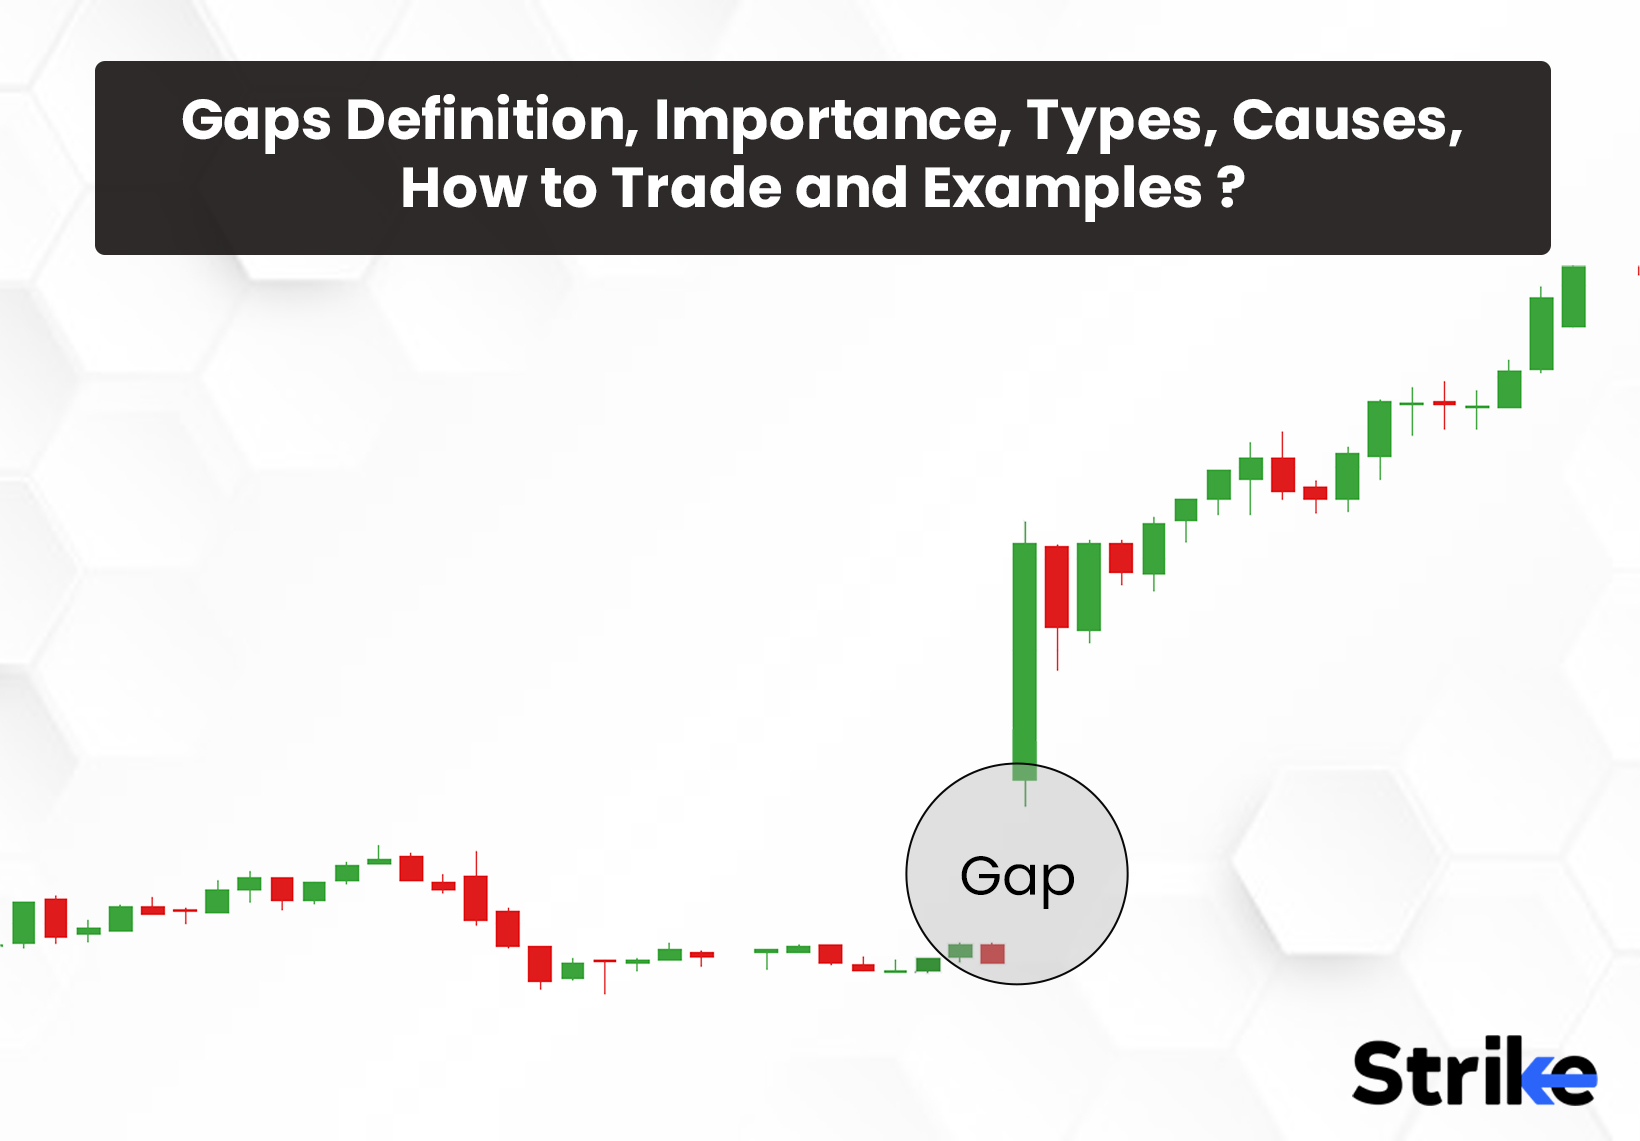 Gaps: Definition, Importance, Types, Causes, How to Trade and Examples